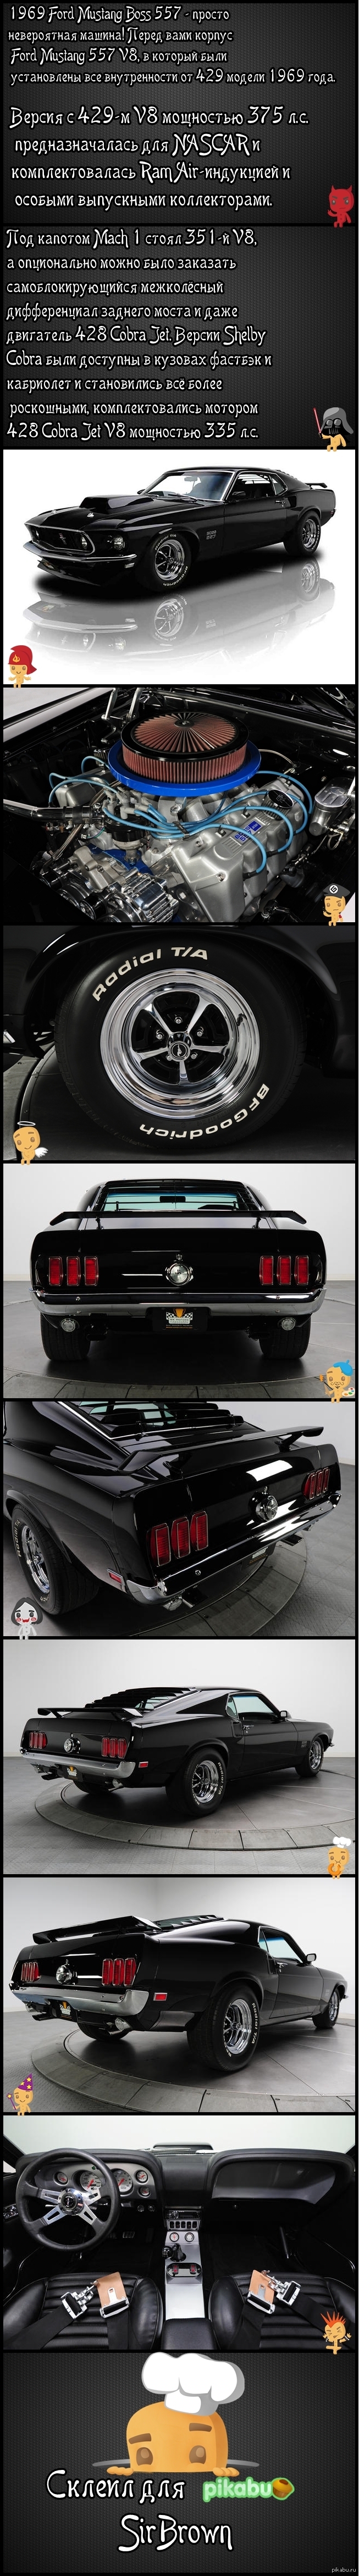 1969 Ford Mustang Boss 557 